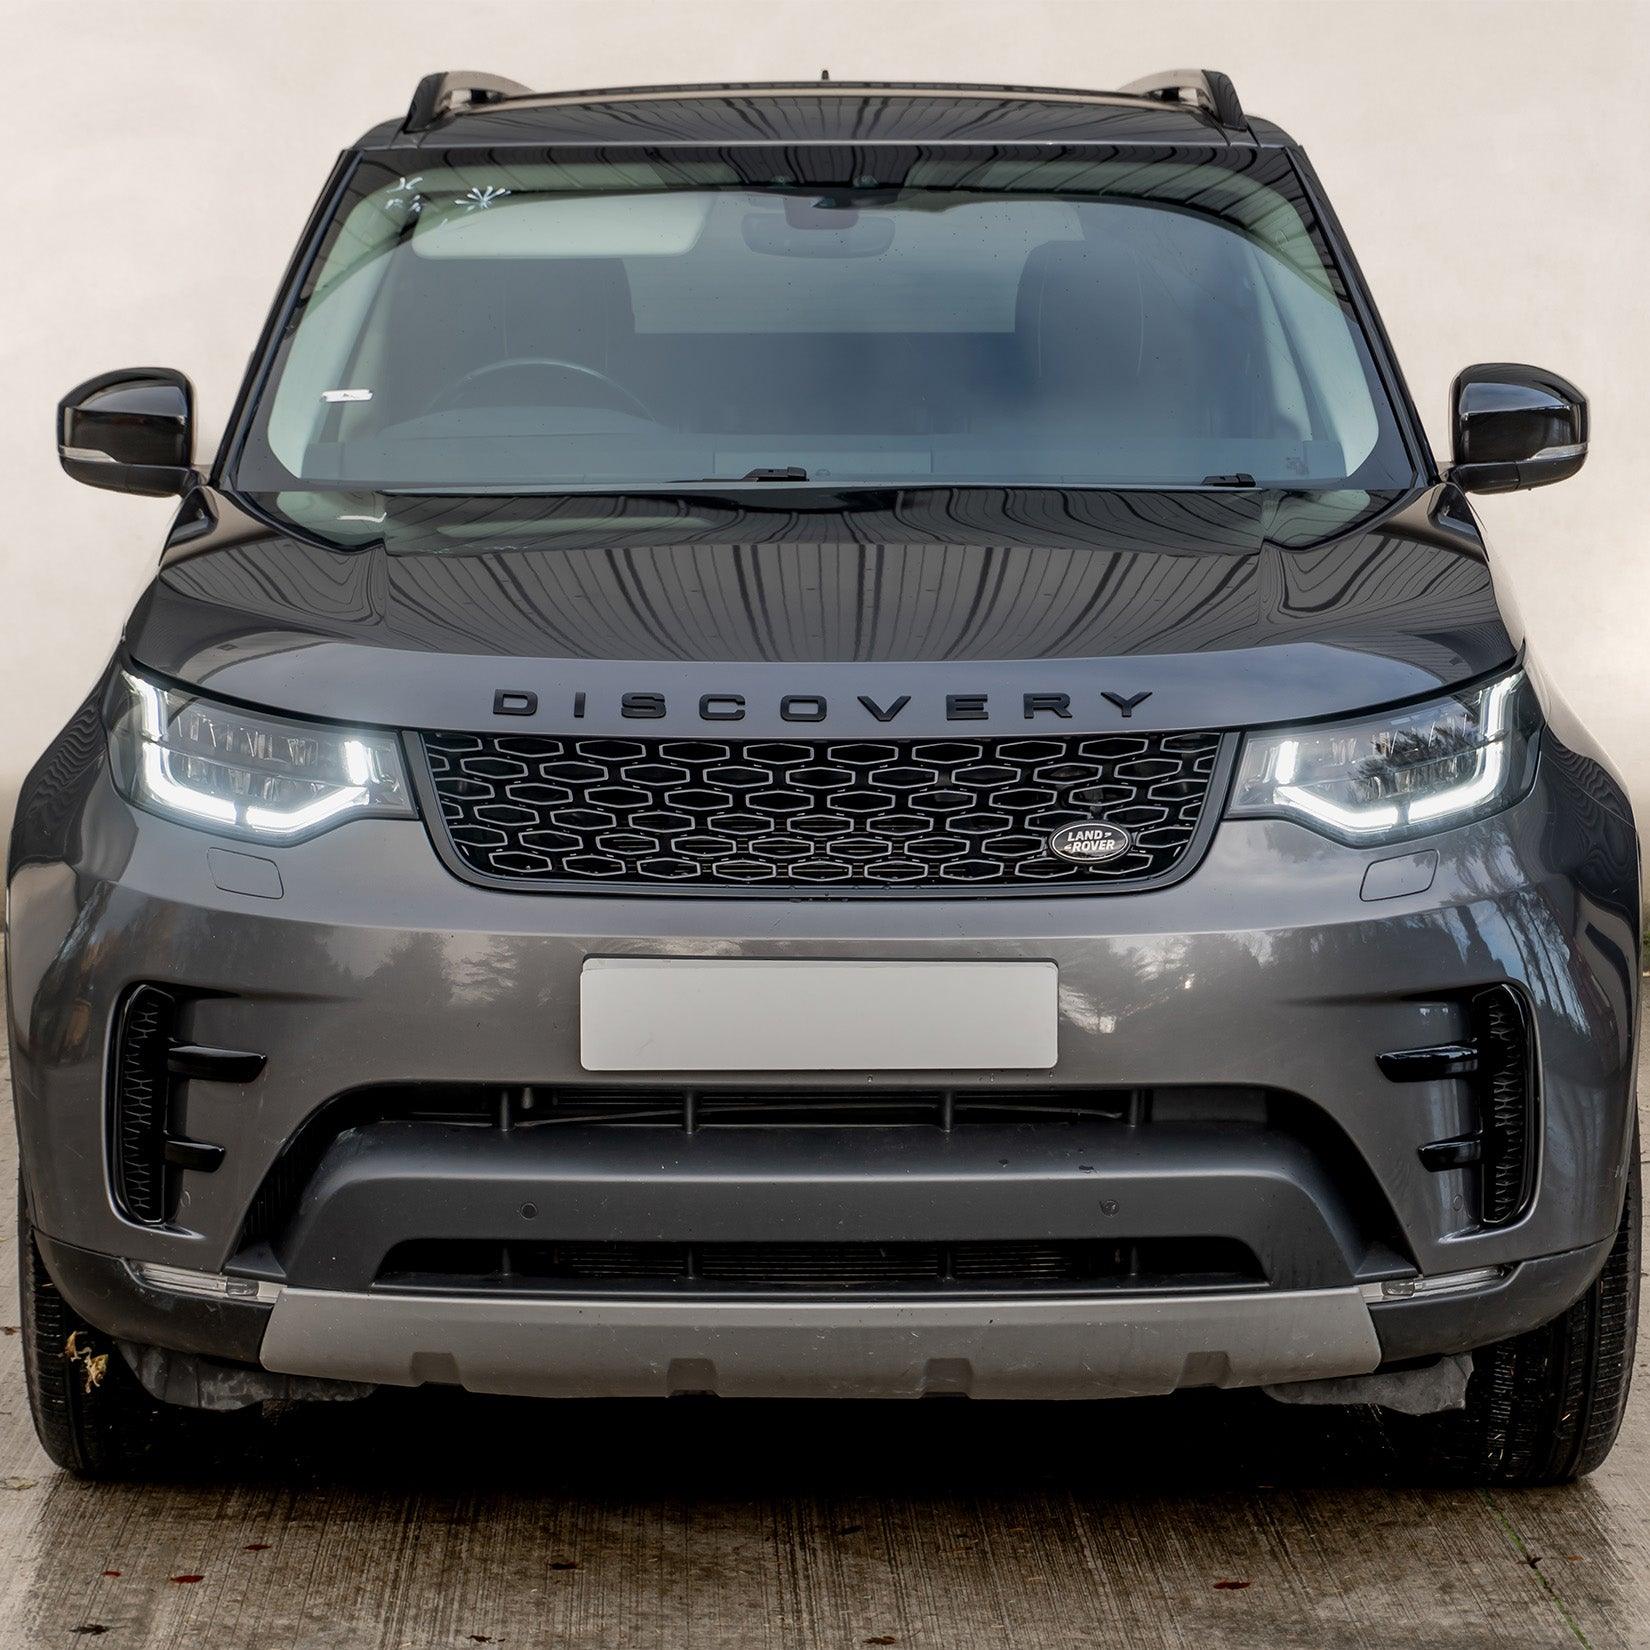 LAND ROVER DISCOVERY 5 - DYNAMIC BLACK EDITION BODY KIT - GRILLE, SIDE VENTS, TRIMS, TOW EYE AND EXHAUST COVERS - Storm Xccessories